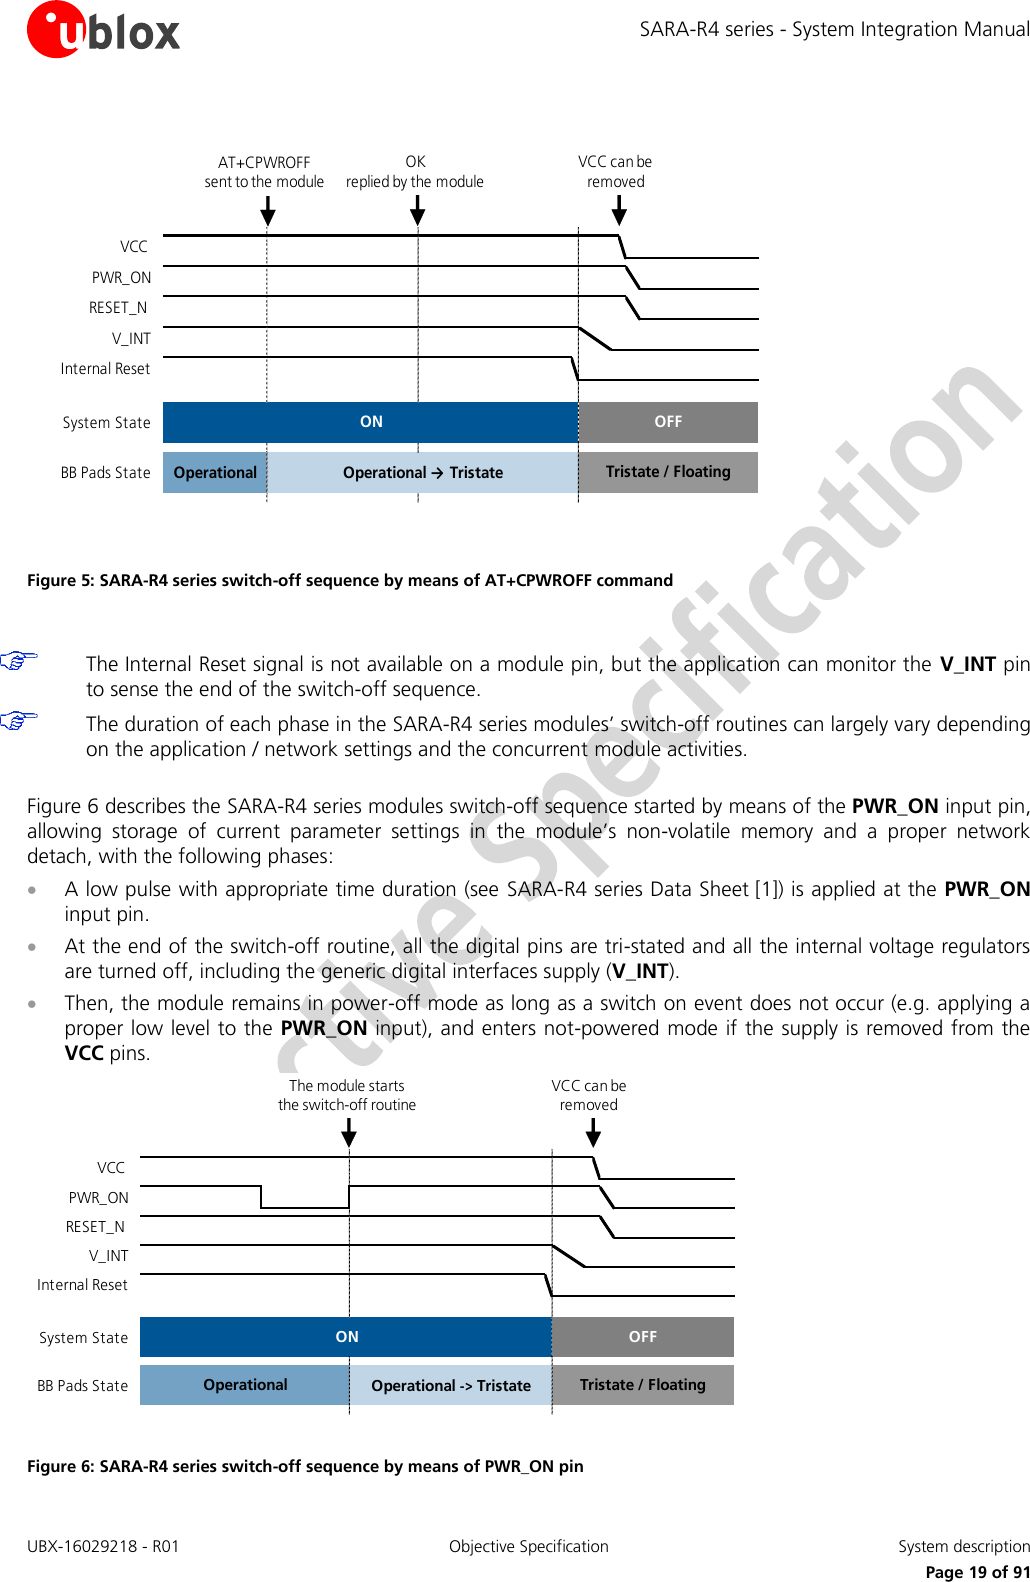 SARA-R4 series - System Integration Manual UBX-16029218 - R01  Objective Specification  System description     Page 19 of 91      Figure 5: SARA-R4 series switch-off sequence by means of AT+CPWROFF command   The Internal Reset signal is not available on a module pin, but the application can monitor the V_INT pin to sense the end of the switch-off sequence.  The duration of each phase in the SARA-R4 series modules’ switch-off routines can largely vary depending on the application / network settings and the concurrent module activities.  Figure 6 describes the SARA-R4 series modules switch-off sequence started by means of the PWR_ON input pin, allowing  storage  of  current  parameter  settings  in  the  module’s  non-volatile  memory  and  a  proper  network detach, with the following phases:  A low pulse with appropriate time duration (see  SARA-R4 series Data Sheet [1]) is applied at the PWR_ON input pin.  At the end of the switch-off routine, all the digital pins are tri-stated and all the internal voltage regulators are turned off, including the generic digital interfaces supply (V_INT).  Then, the module remains in power-off mode as long as a switch on event does not occur (e.g. applying a proper low level to the PWR_ON input), and enters not-powered mode if the supply is removed from the VCC pins. VCC PWR_ONRESET_N V_INTInternal ResetSystem StateBB Pads StateOFFTristate / FloatingONOperational -&gt; TristateOperational0 s~2.5 s~5 sThe module starts   the switch-off routineVCC can be removed Figure 6: SARA-R4 series switch-off sequence by means of PWR_ON pin VCC PWR_ONRESET_N V_INTInternal ResetSystem StateBB Pads State OperationalOFFTristate / FloatingONOperational → TristateAT+CPWROFFsent to the module0 s~2.5 s~5 sOKreplied by the moduleVCC can be removed